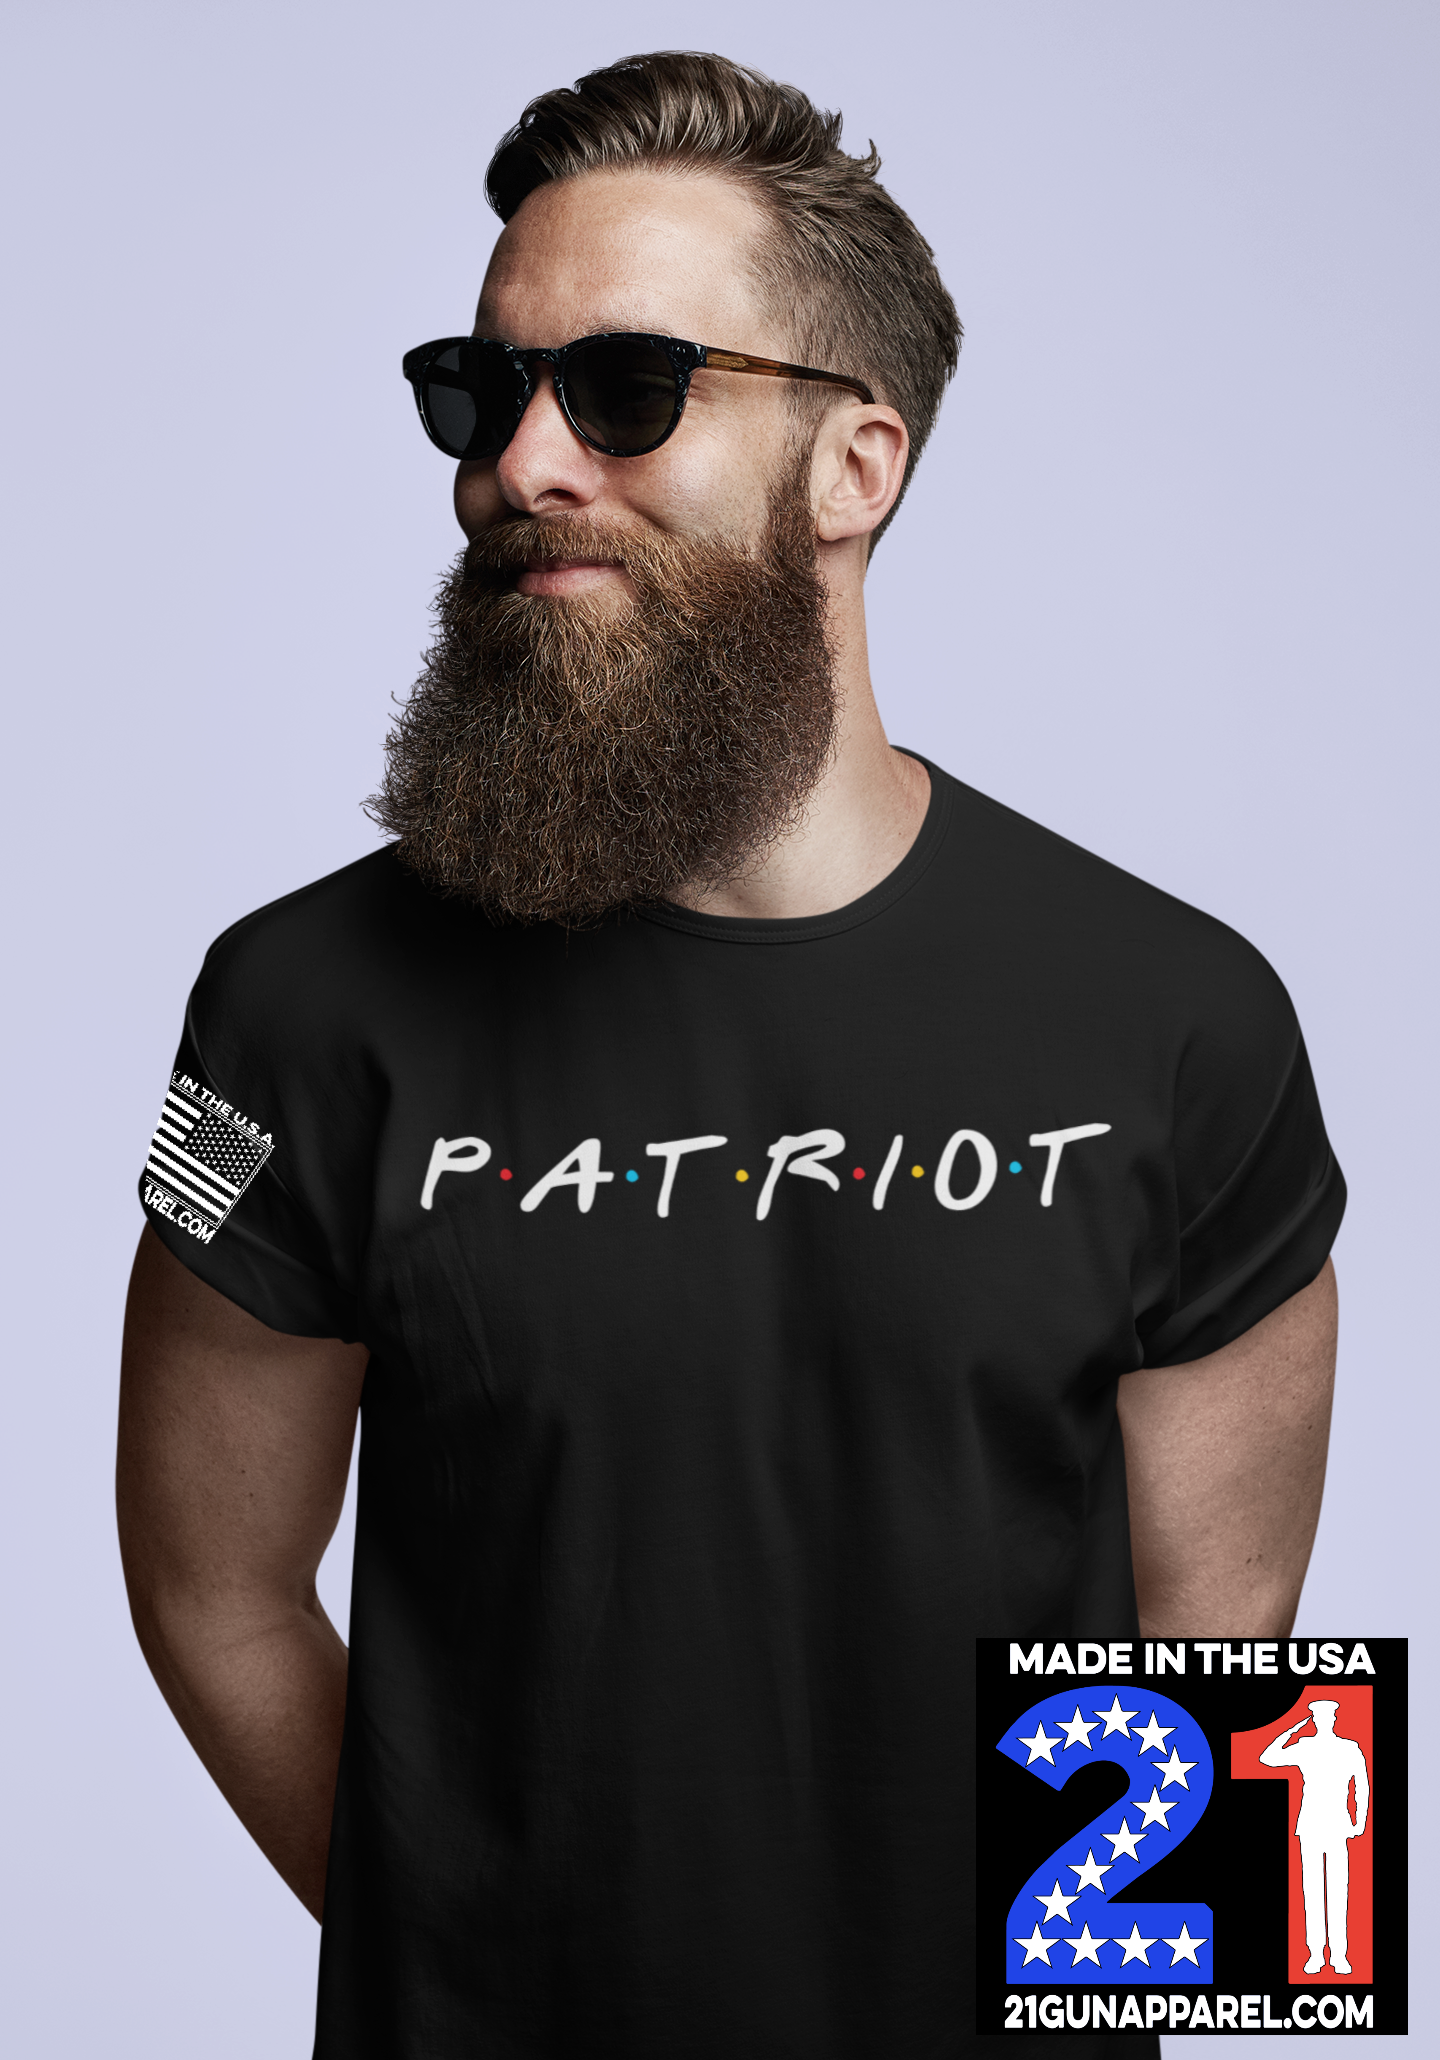 The One With The Patriot T-shirt